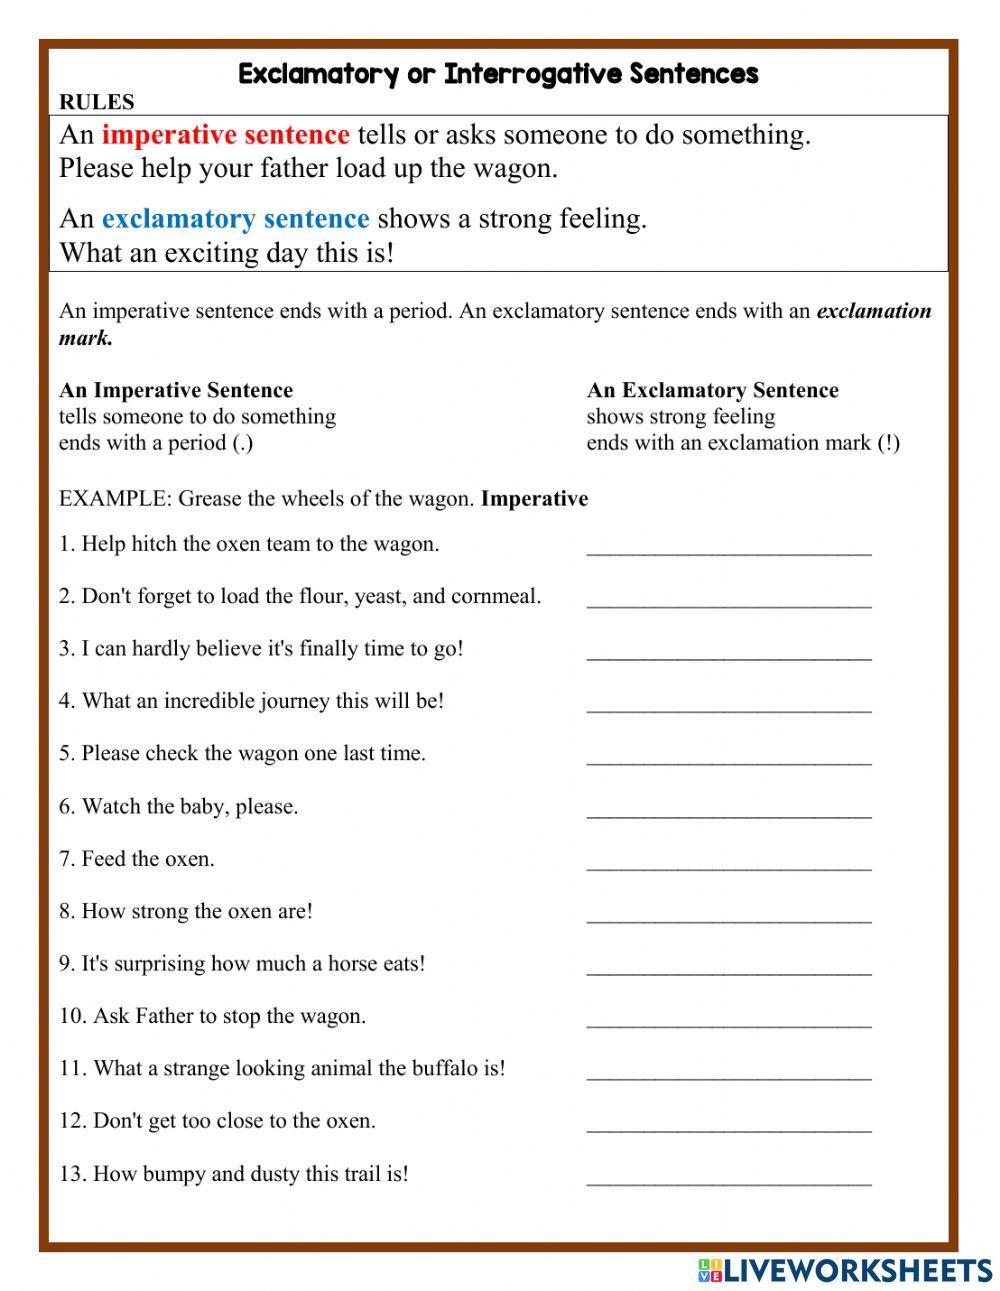 imperative-and-exclamatory-sentences-interactive-activity-live-worksheets